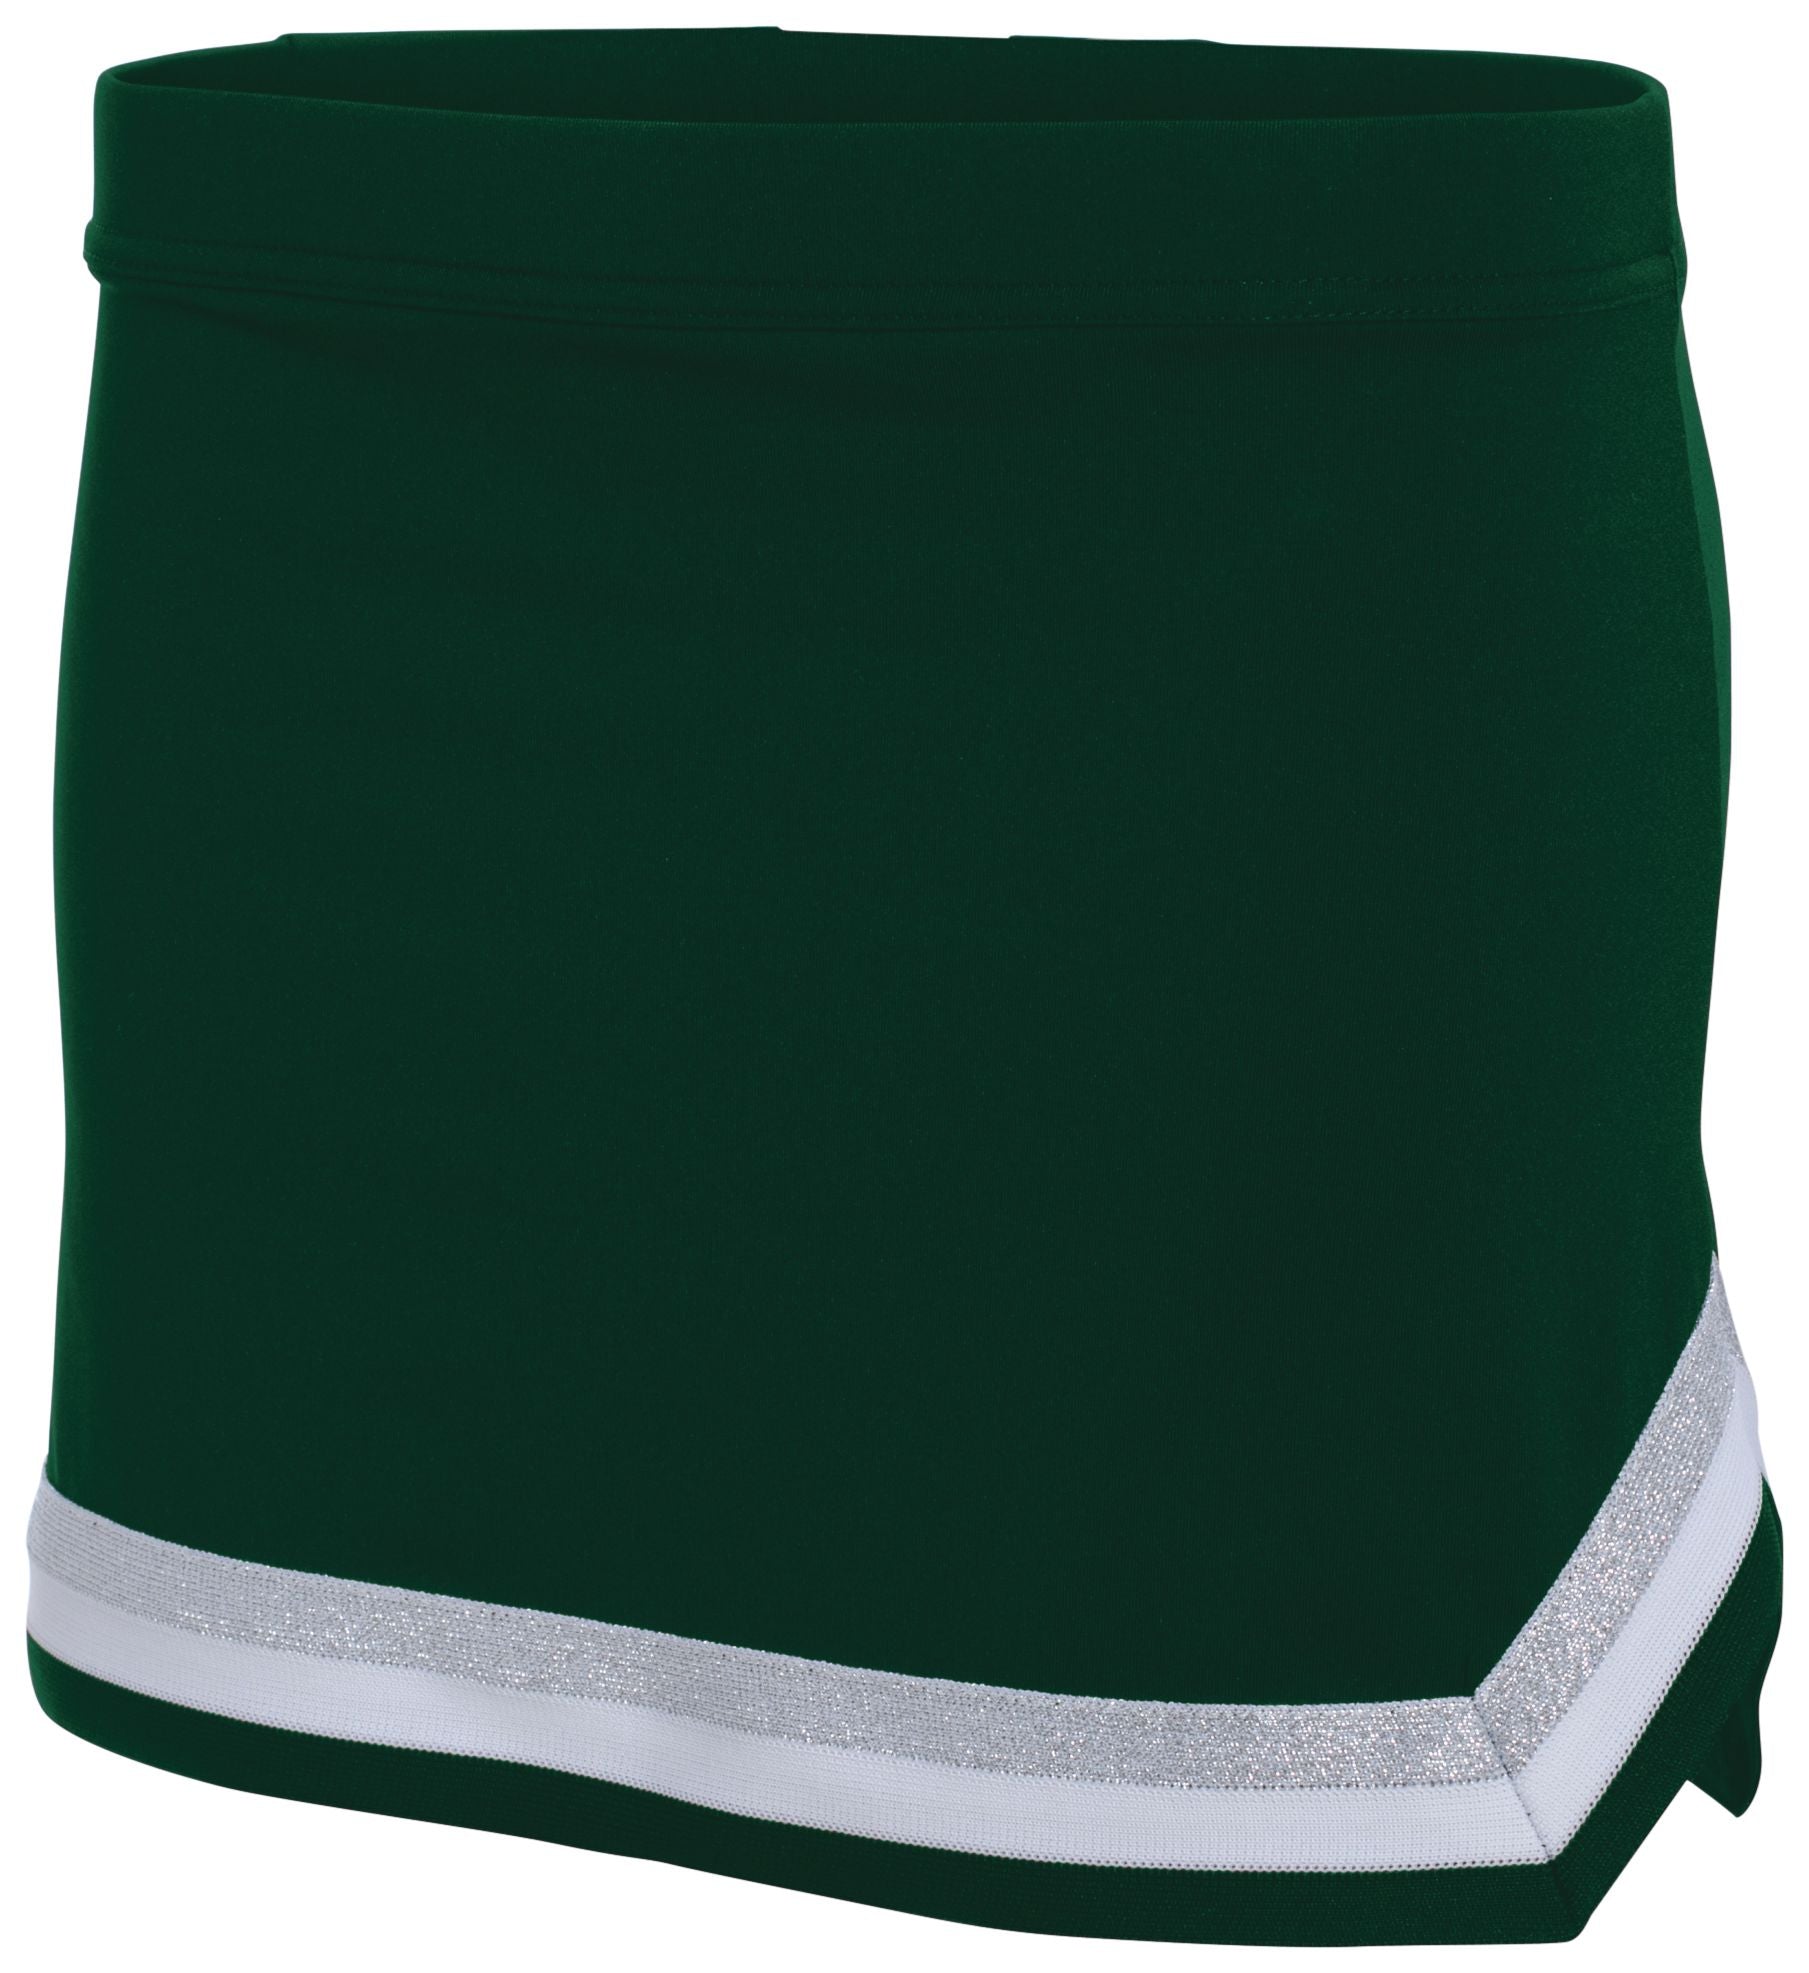 Augusta Sportswear Girls Pike Skirt in Dark Green/White/Metallic Silver  -Part of the Girls, Augusta-Products, Cheer product lines at KanaleyCreations.com